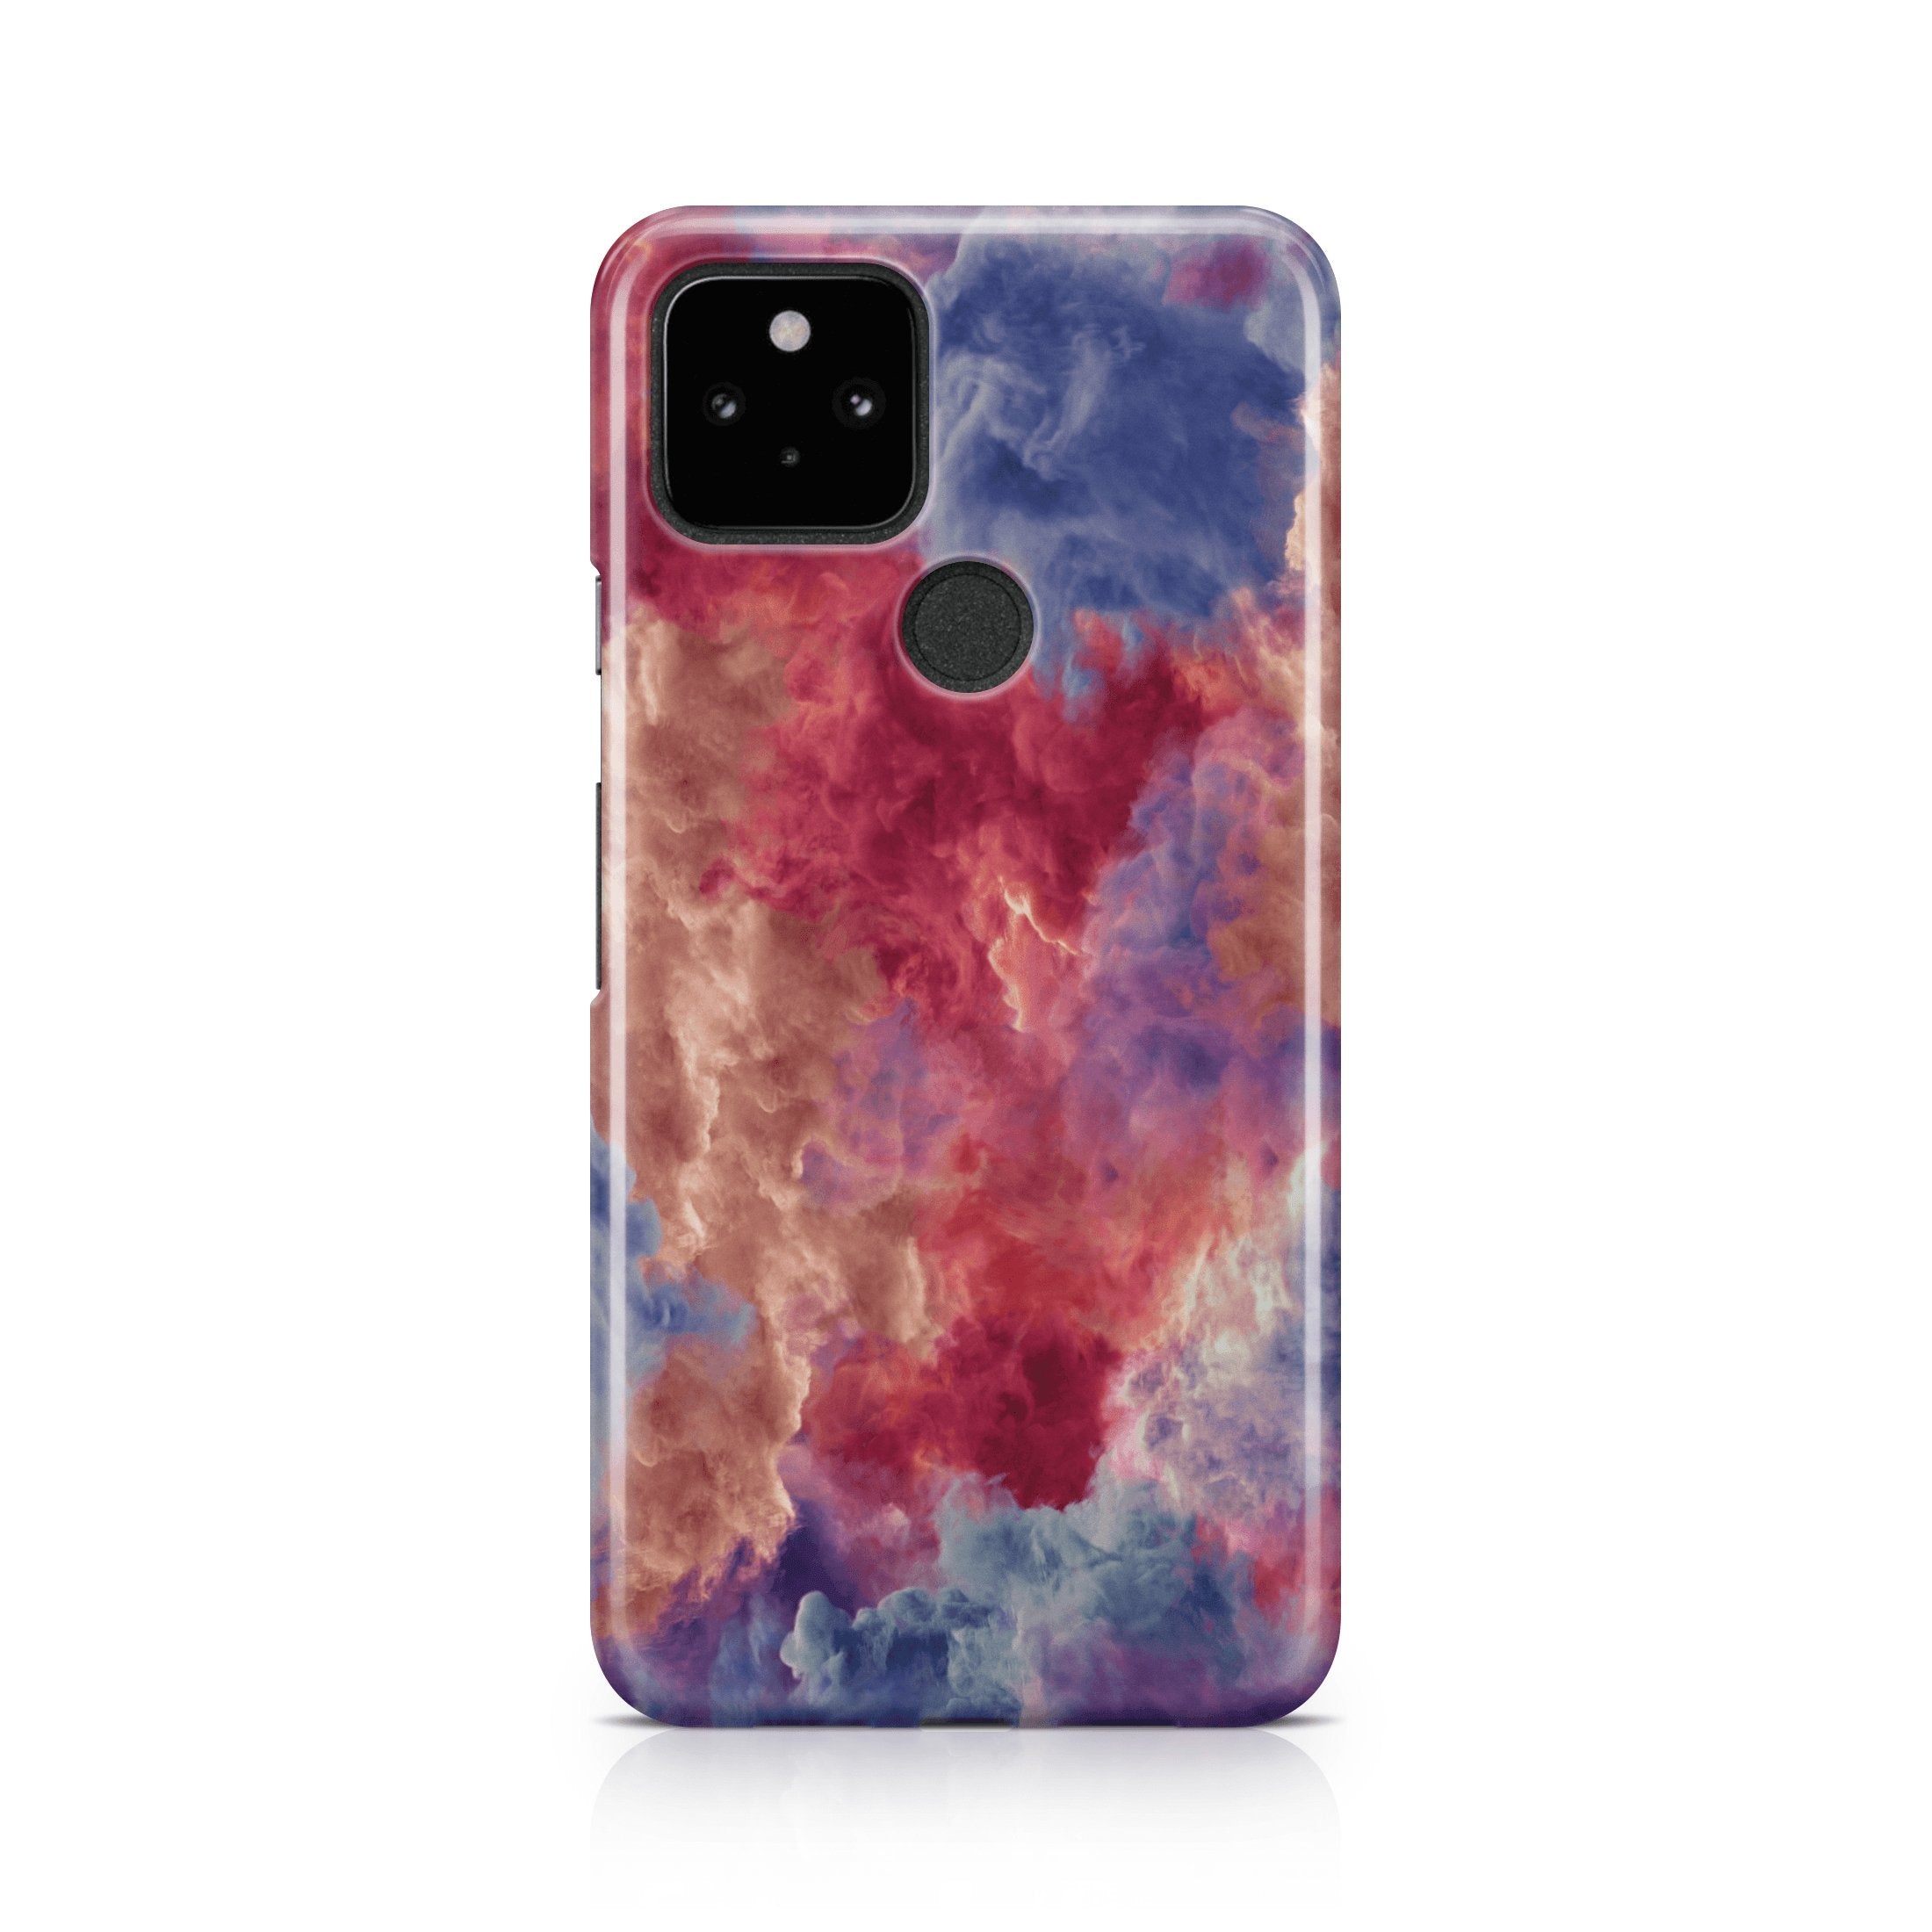 Red & Blue Smoke Cloud - Google phone case designs by CaseSwagger